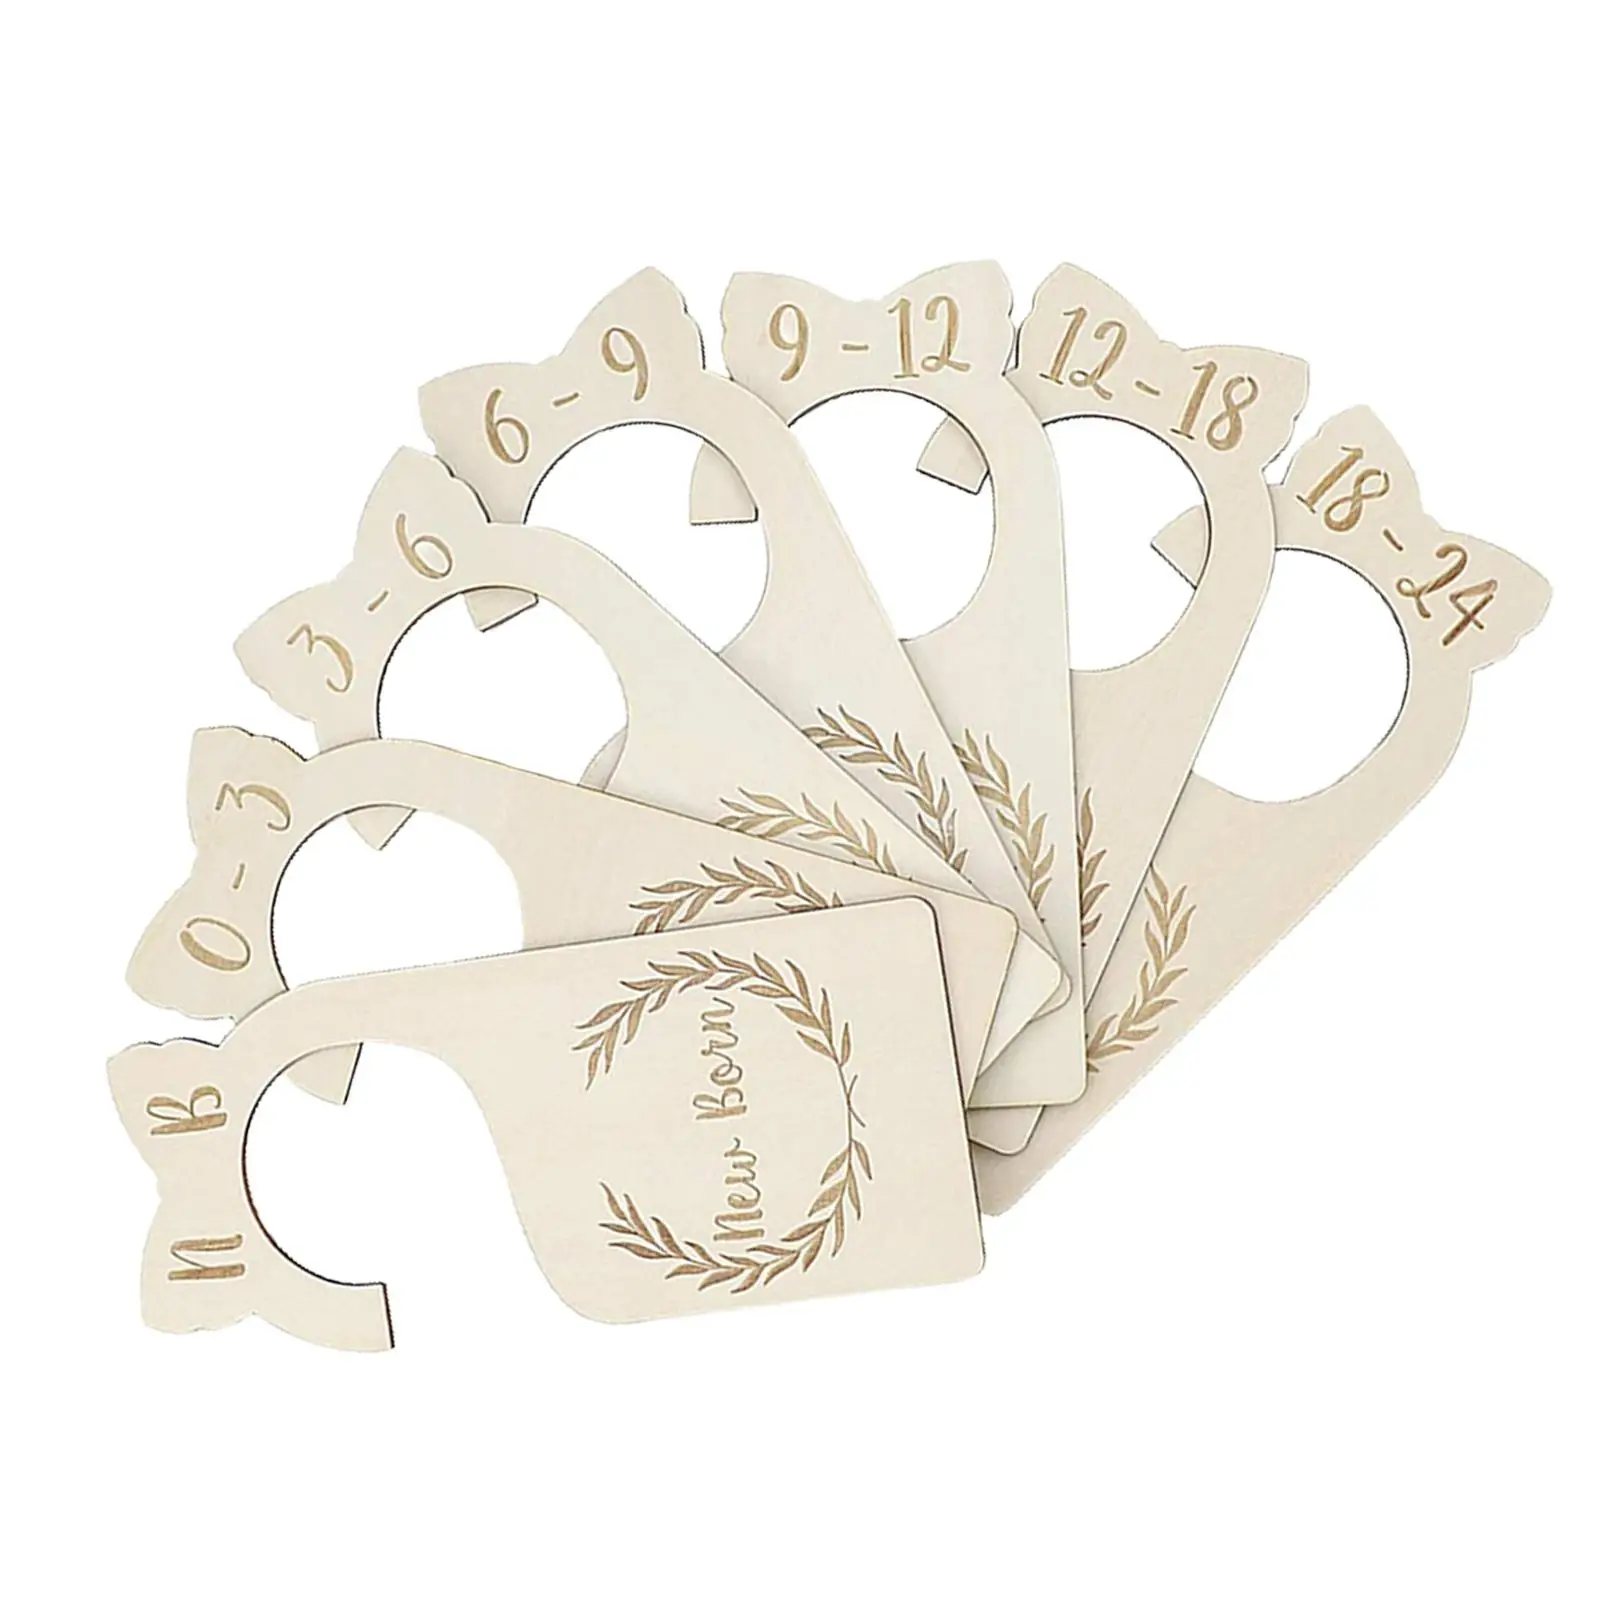 

7Pcs/Set Adorable Baby Closet Dividers Clothing Size Age Dividers Wood Clothes Size Hanger Organizer for Bedroom Room Daily Use